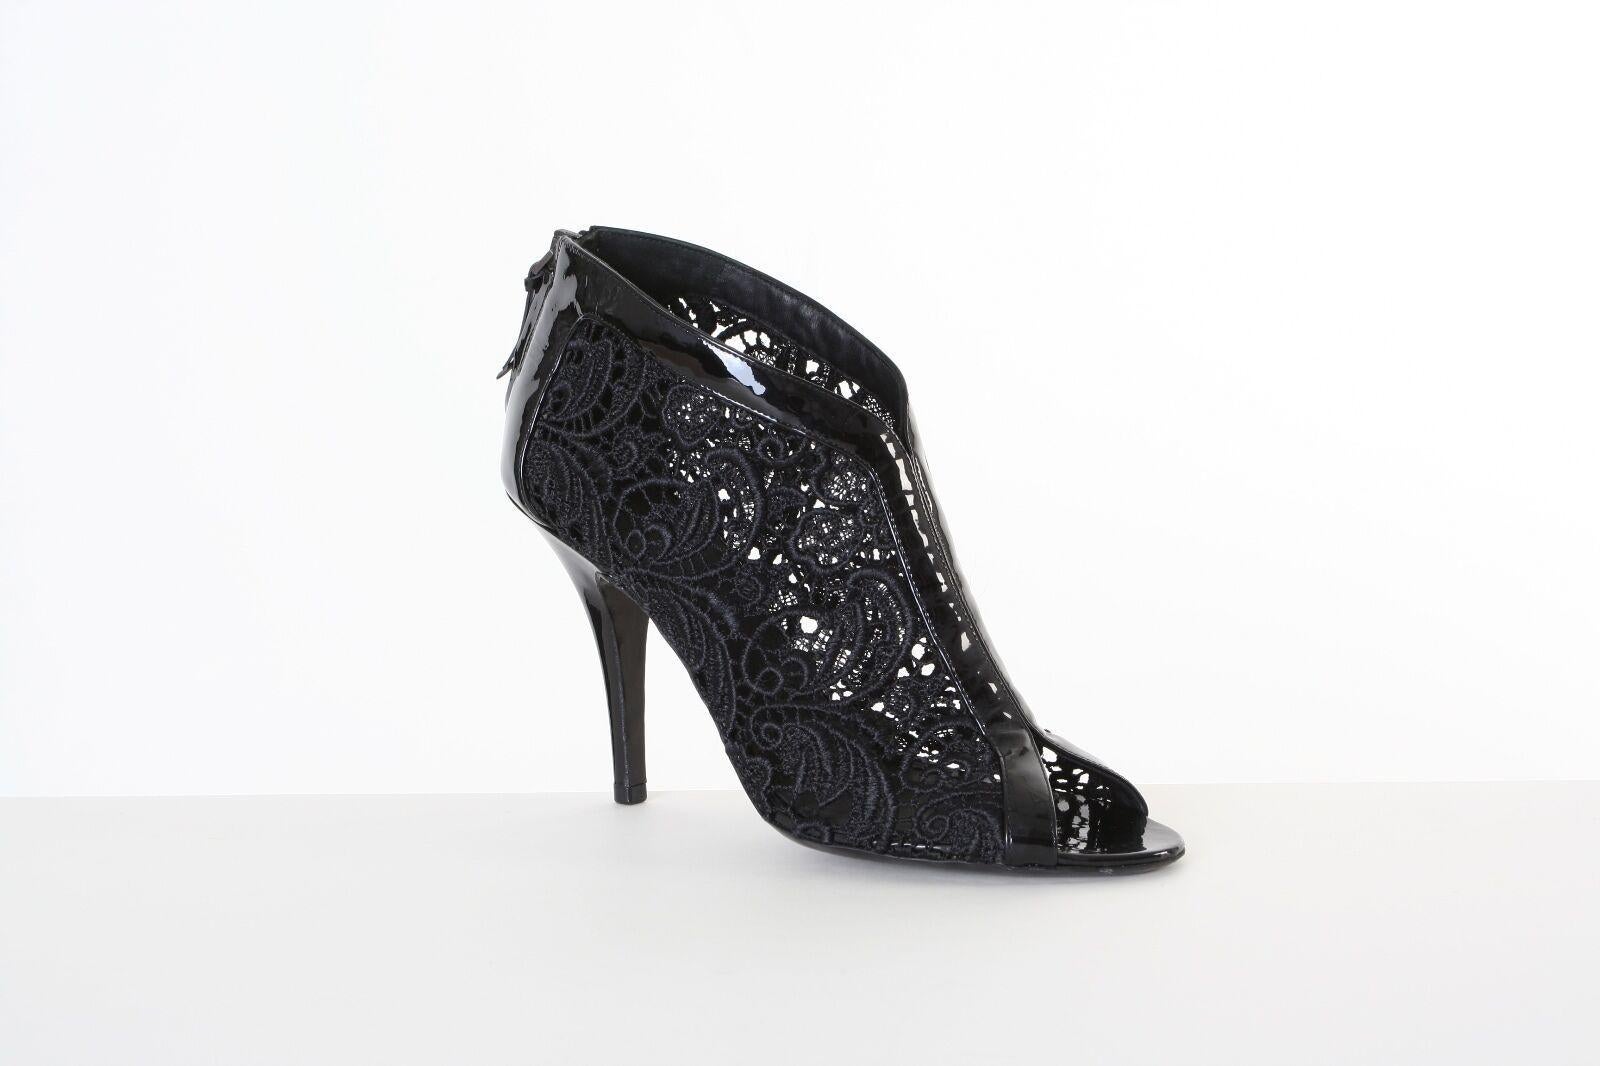 GIVENCHY black floral lace patent leather peep toe booties heels EU37.5 US7.5
GIVECHY by RICCARDO TISCIBLACK FLORAL LACE . 
PATENT LEATHER TRIMMING . 
PEEP TOE . 
COVERED HEEL . 
ZIP BACK CLOSURE WITH RIBBON PULL . 
STILETTO HEEL . 
BOOTIES . 
MADE